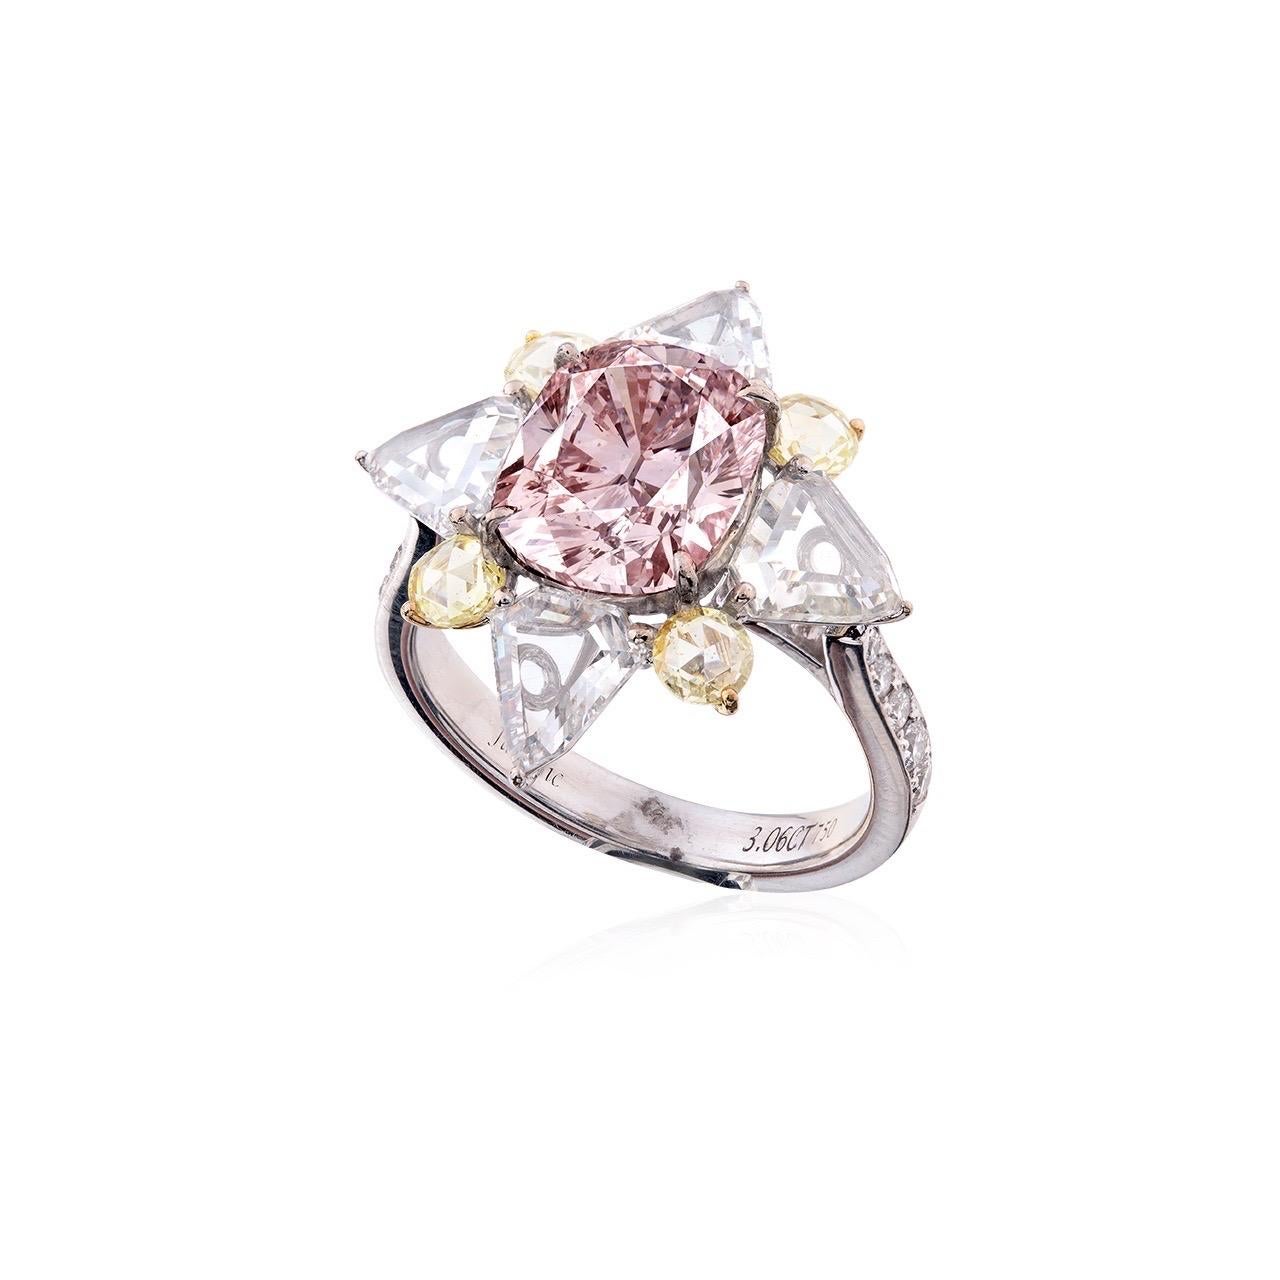 Main stone: 3.21 carat Light Pink, SI2, Cushion

From Emilio Jewelry, a well known and respected wholesaler/dealer located on New York’s iconic Fifth Avenue, 
Perfect ring for someone who is looking for a natural pink diamond of substantial size!